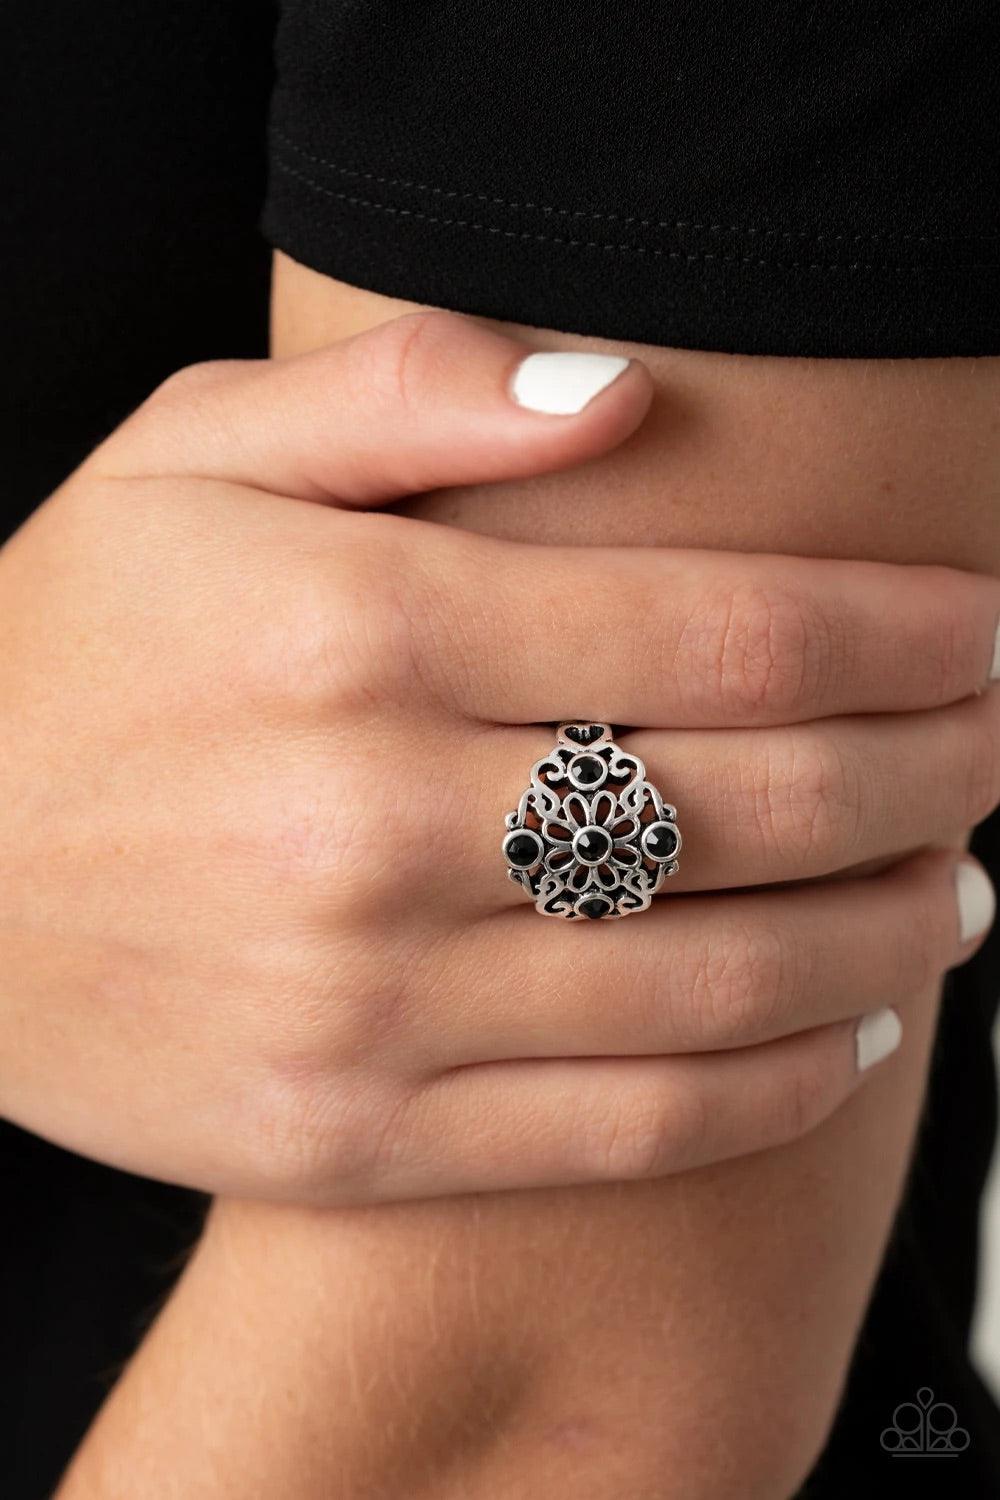 Paparazzi Accessories One DAISY At A Time - Black Dotted with glittery black rhinestones, glistening silver filigree blooms into a whimsical floral centerpiece atop the finger. Features a stretchy band for a flexible fit. Sold as one individual ring. Jewe